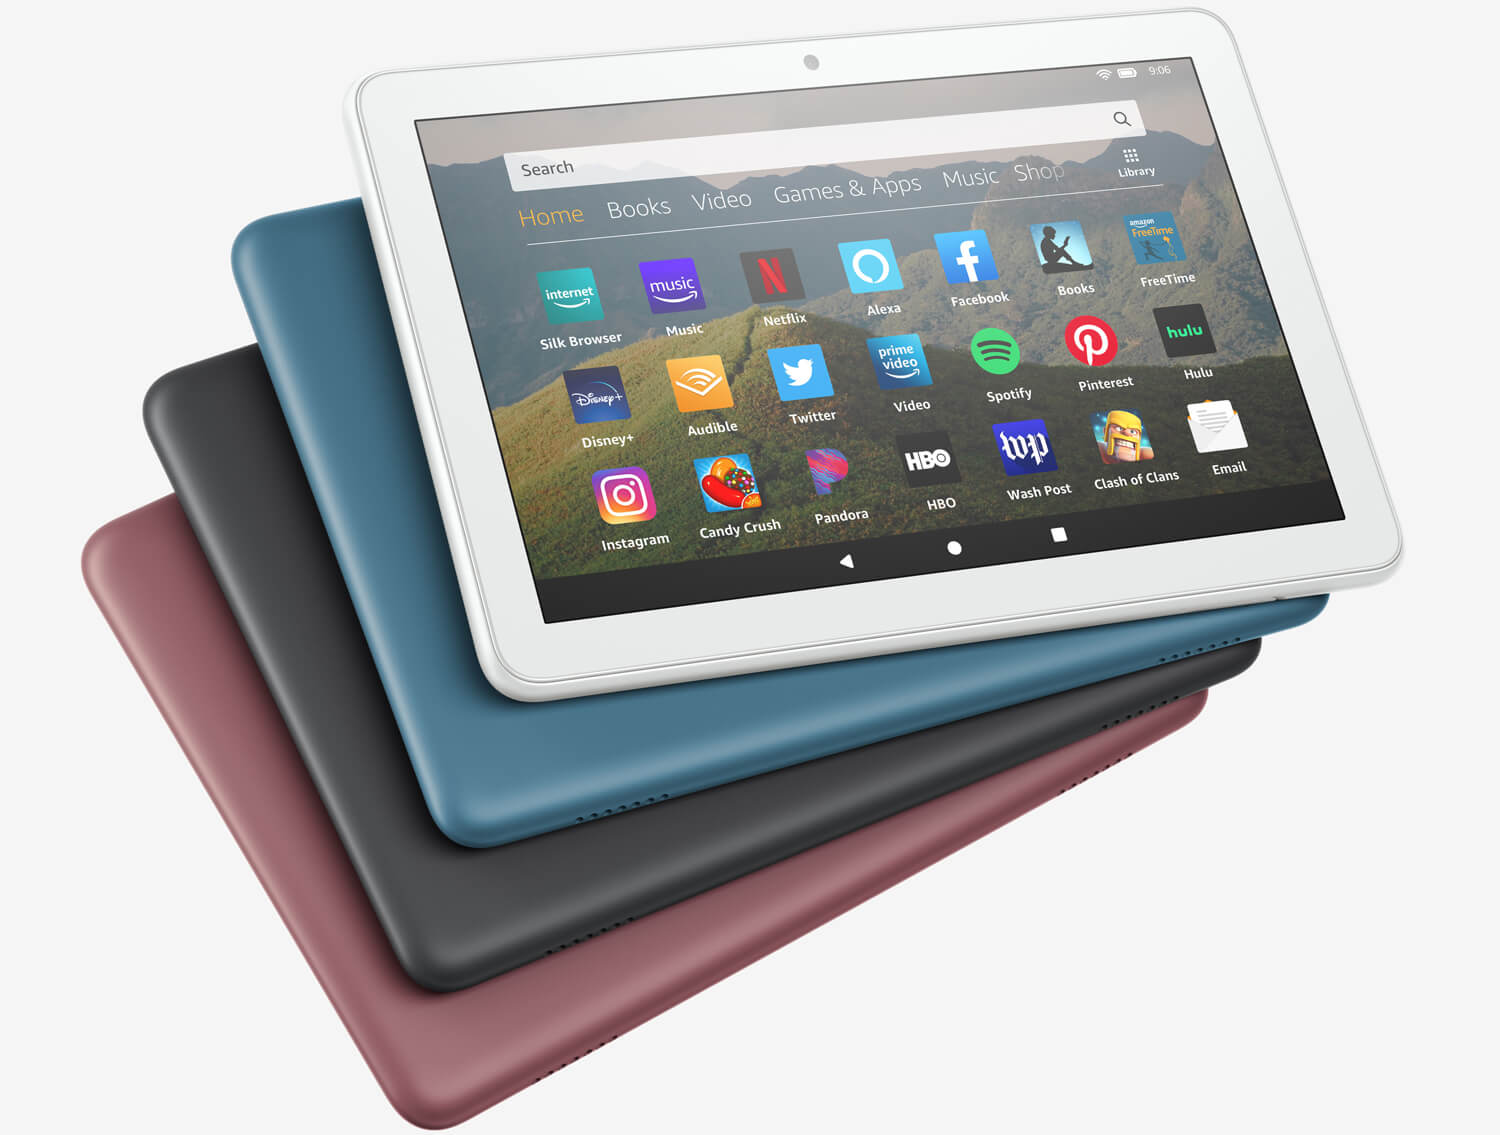 Amazon updates Fire HD 8 tablet with faster processor and more storage